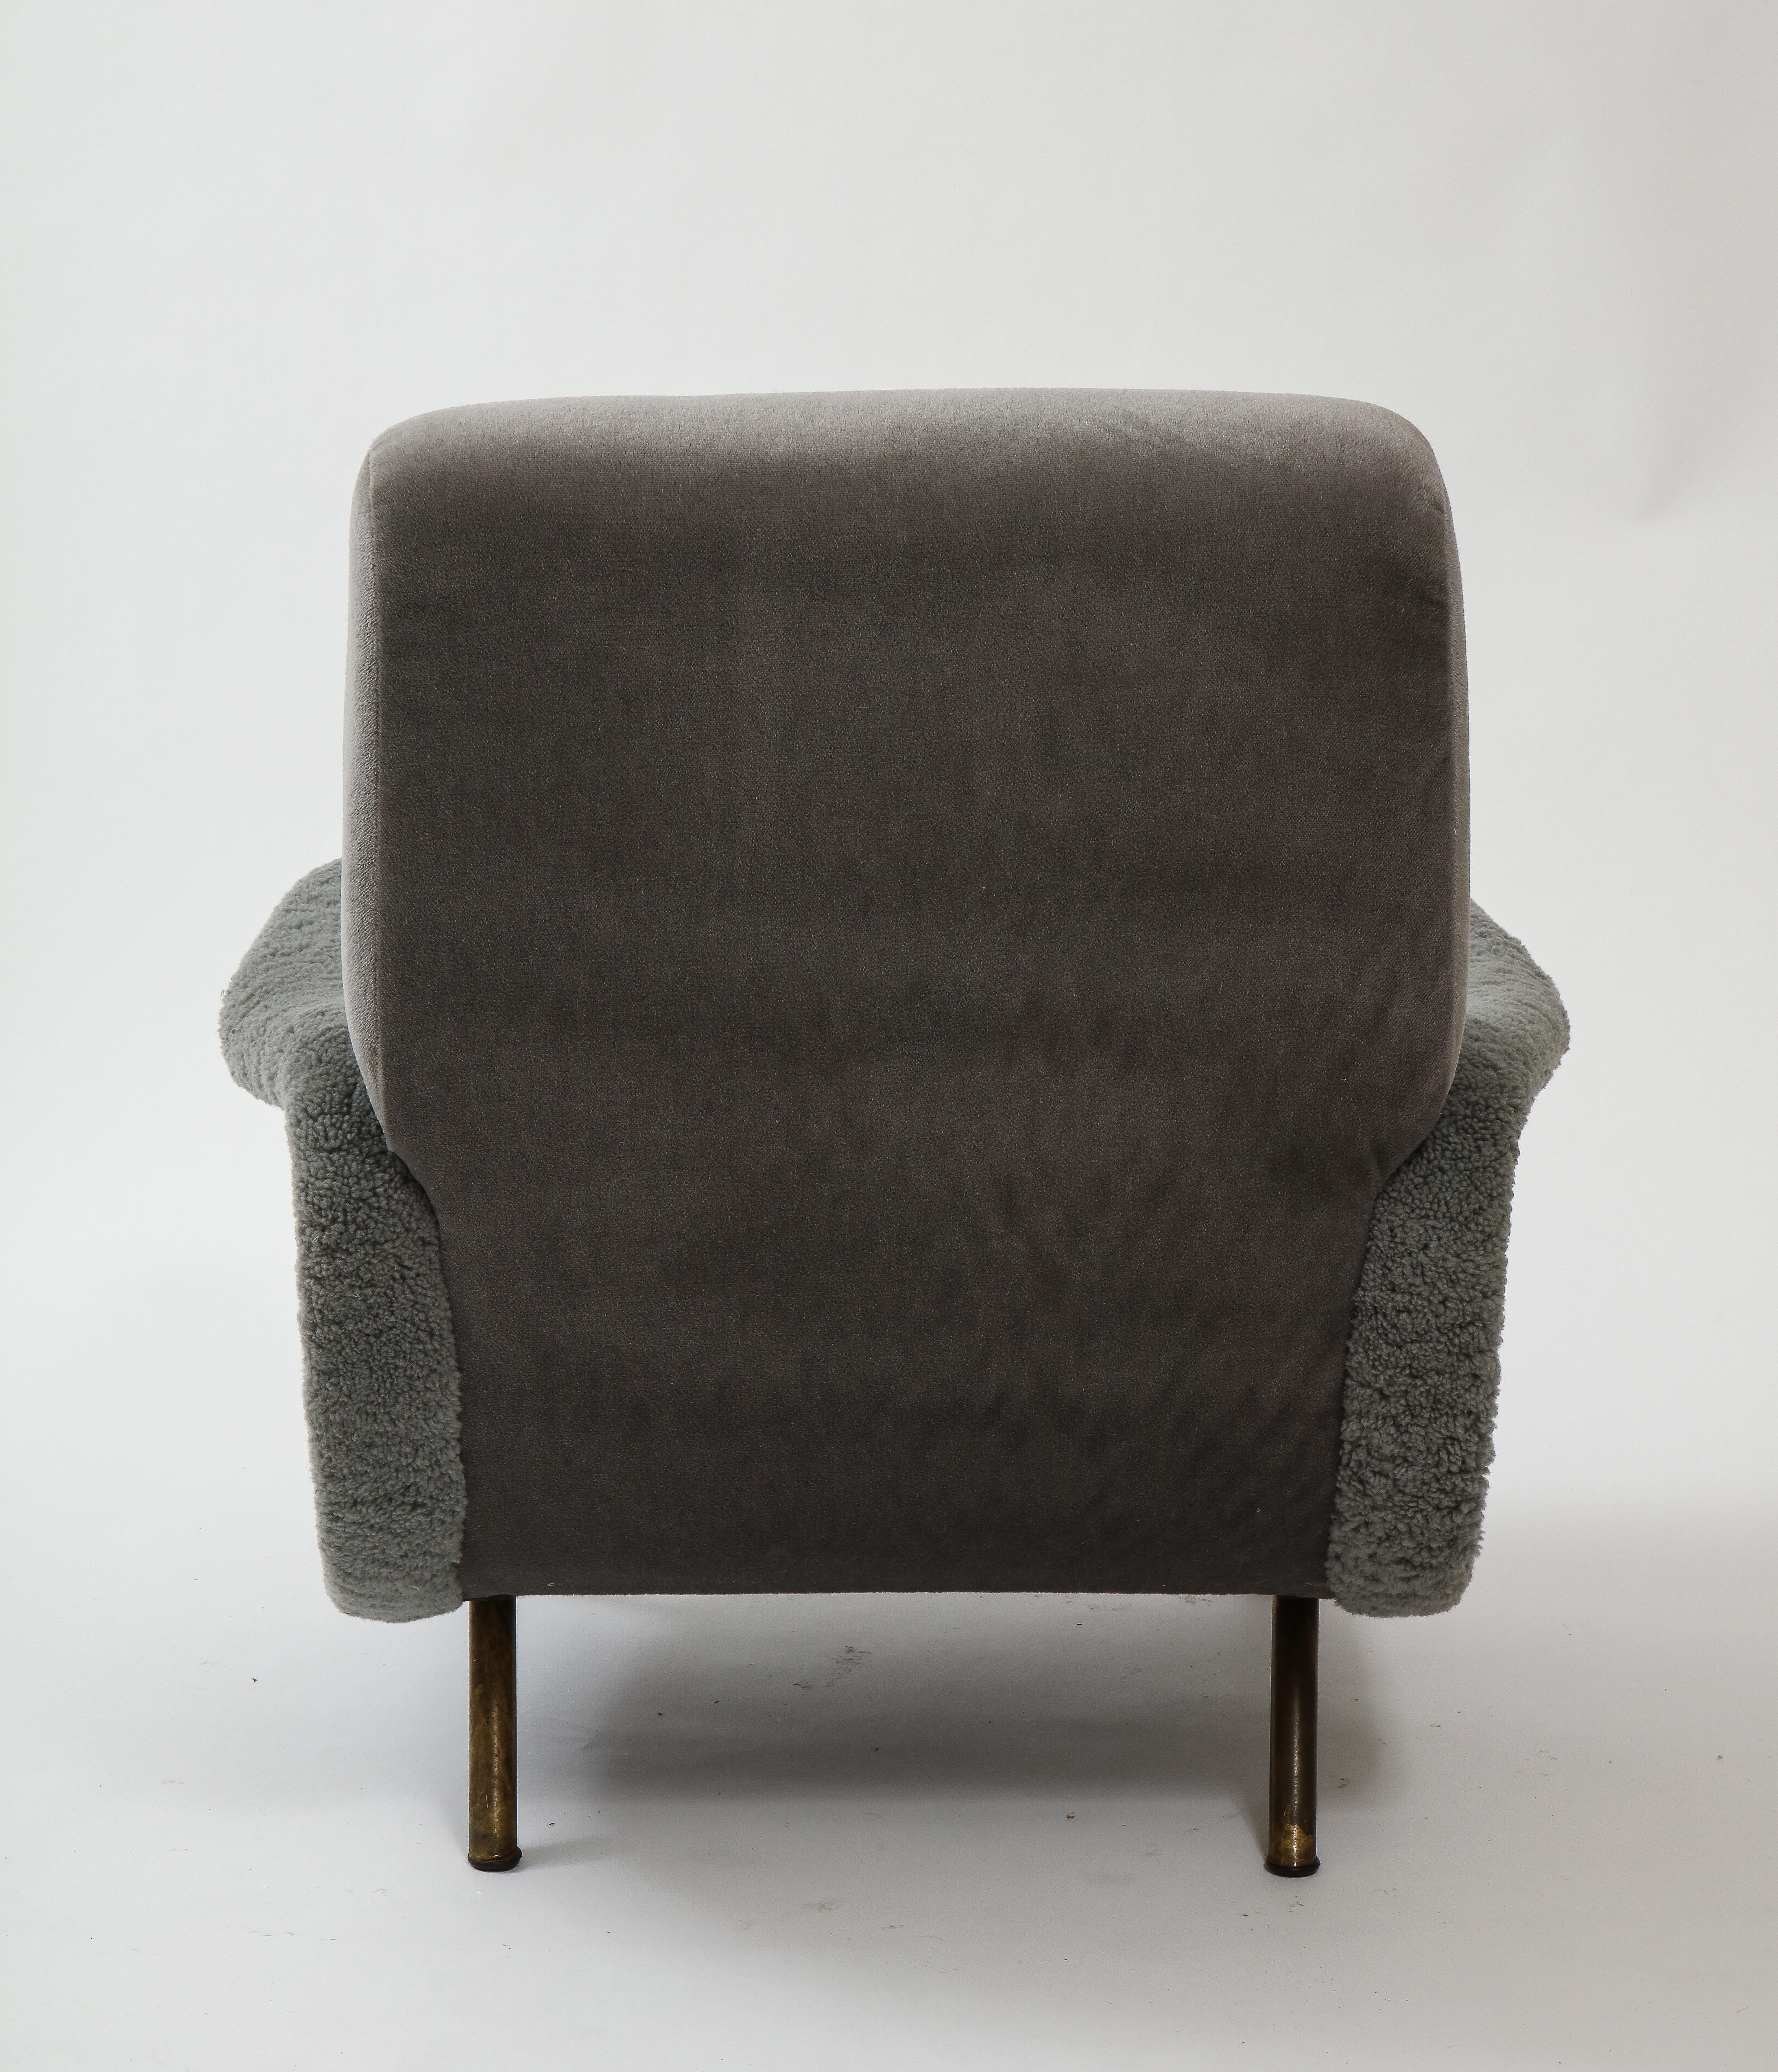 Brass Marco Zanuso Arflex Lady Chair, Mohair and Shearling, Midcentury, Italy